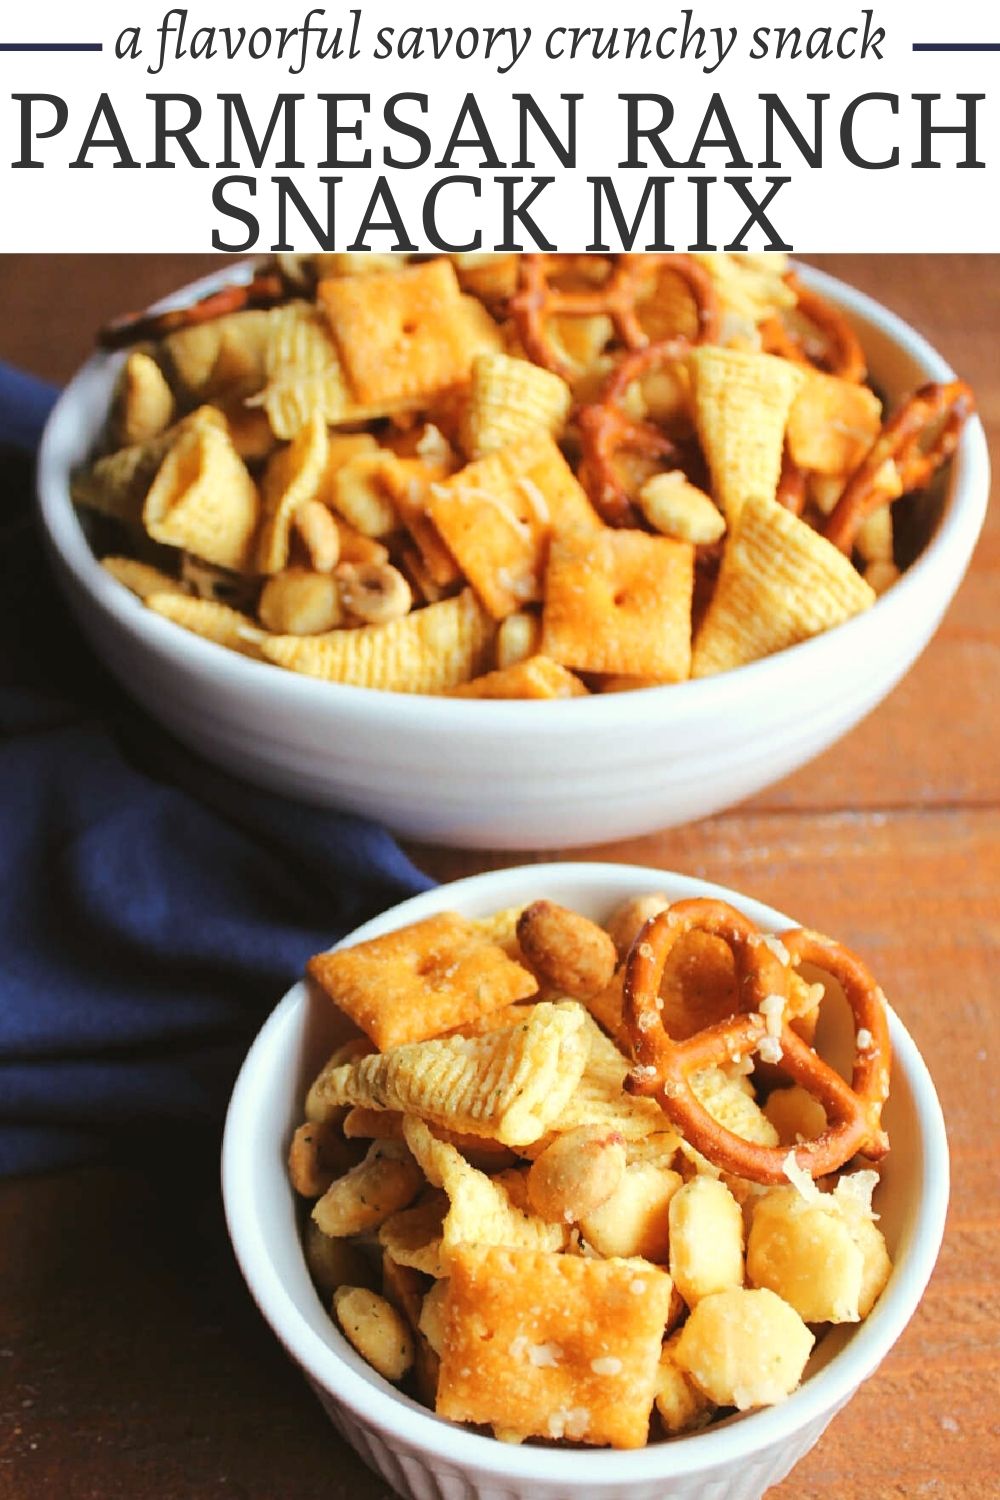 Parmesan ranch snack mix may just become your new favorite munchy. Loaded with crackers, pretzels, peanuts, bugles and more it is a salty snack lover's dream come true. Of course the Parmesan cheese and herby ranch really give it a flavor pop.